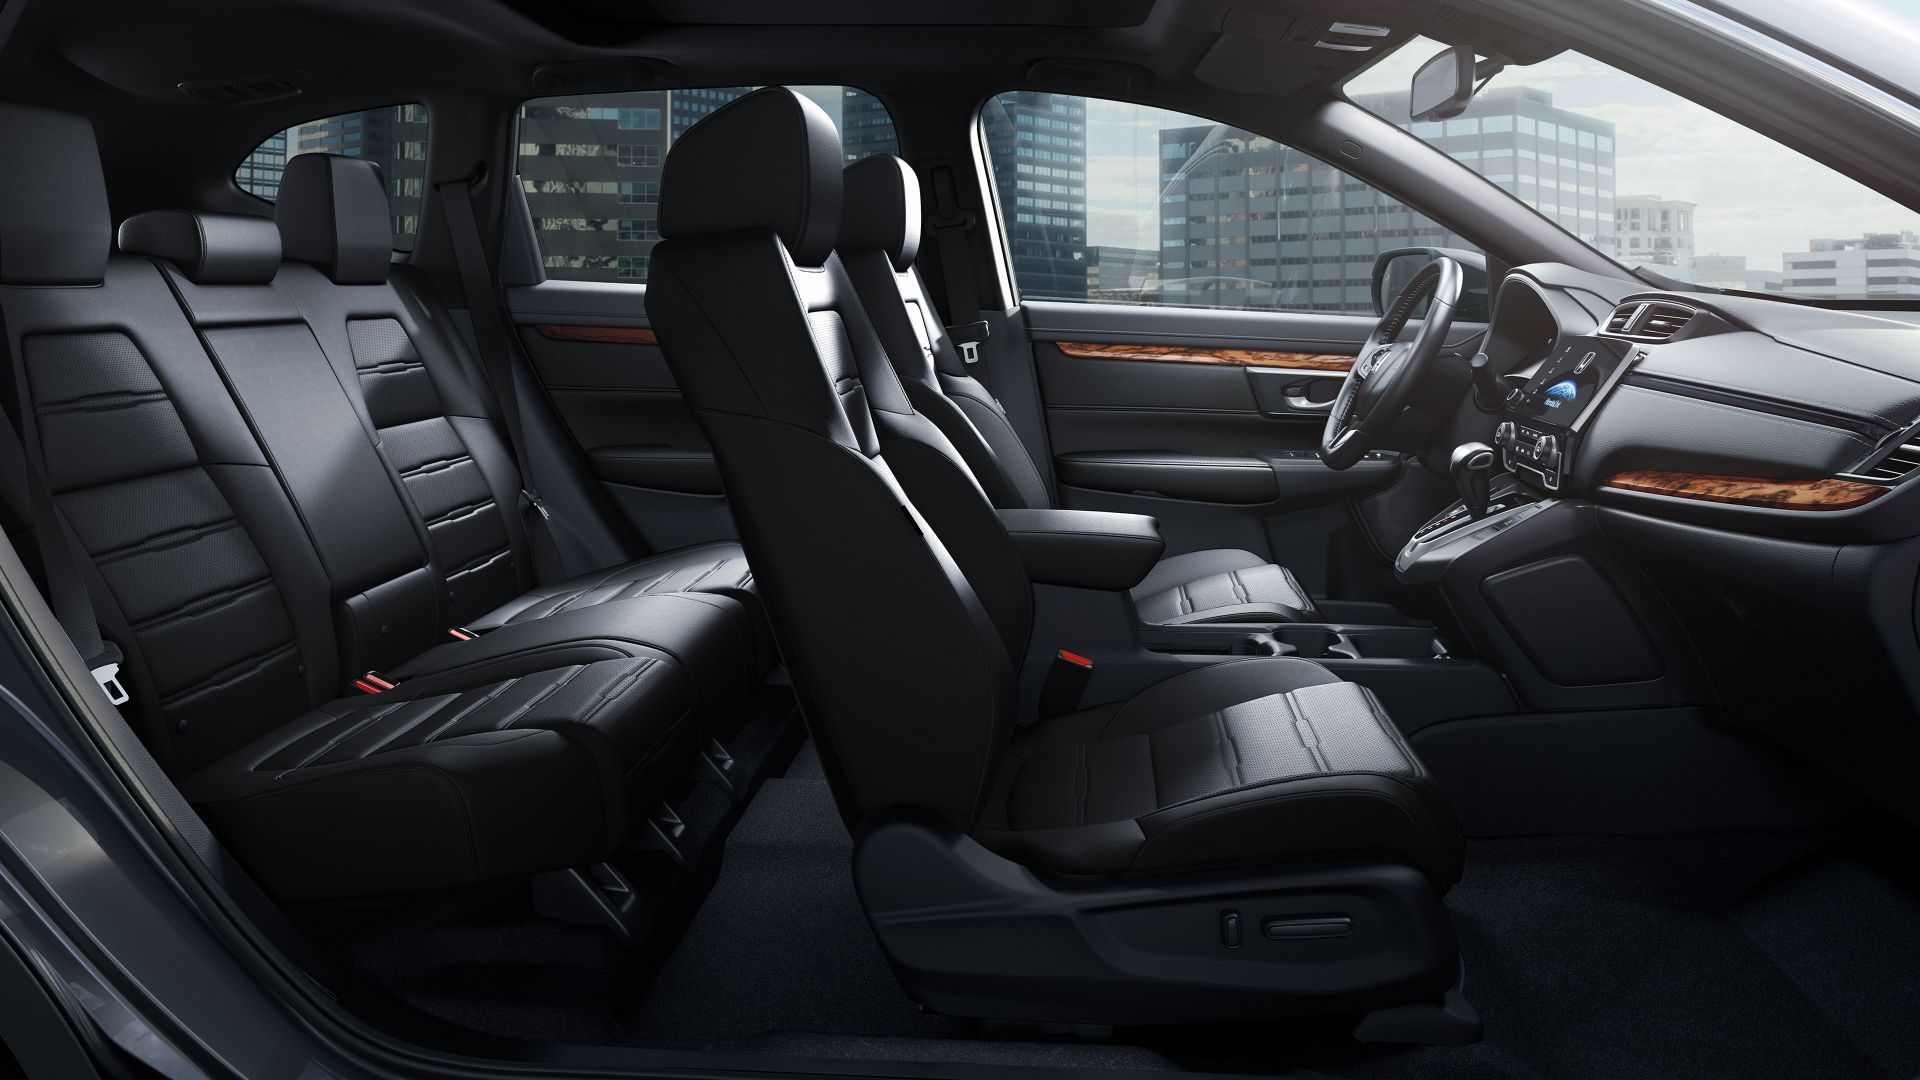 2018 Honda CR-V interior, front and rear seats in black leather